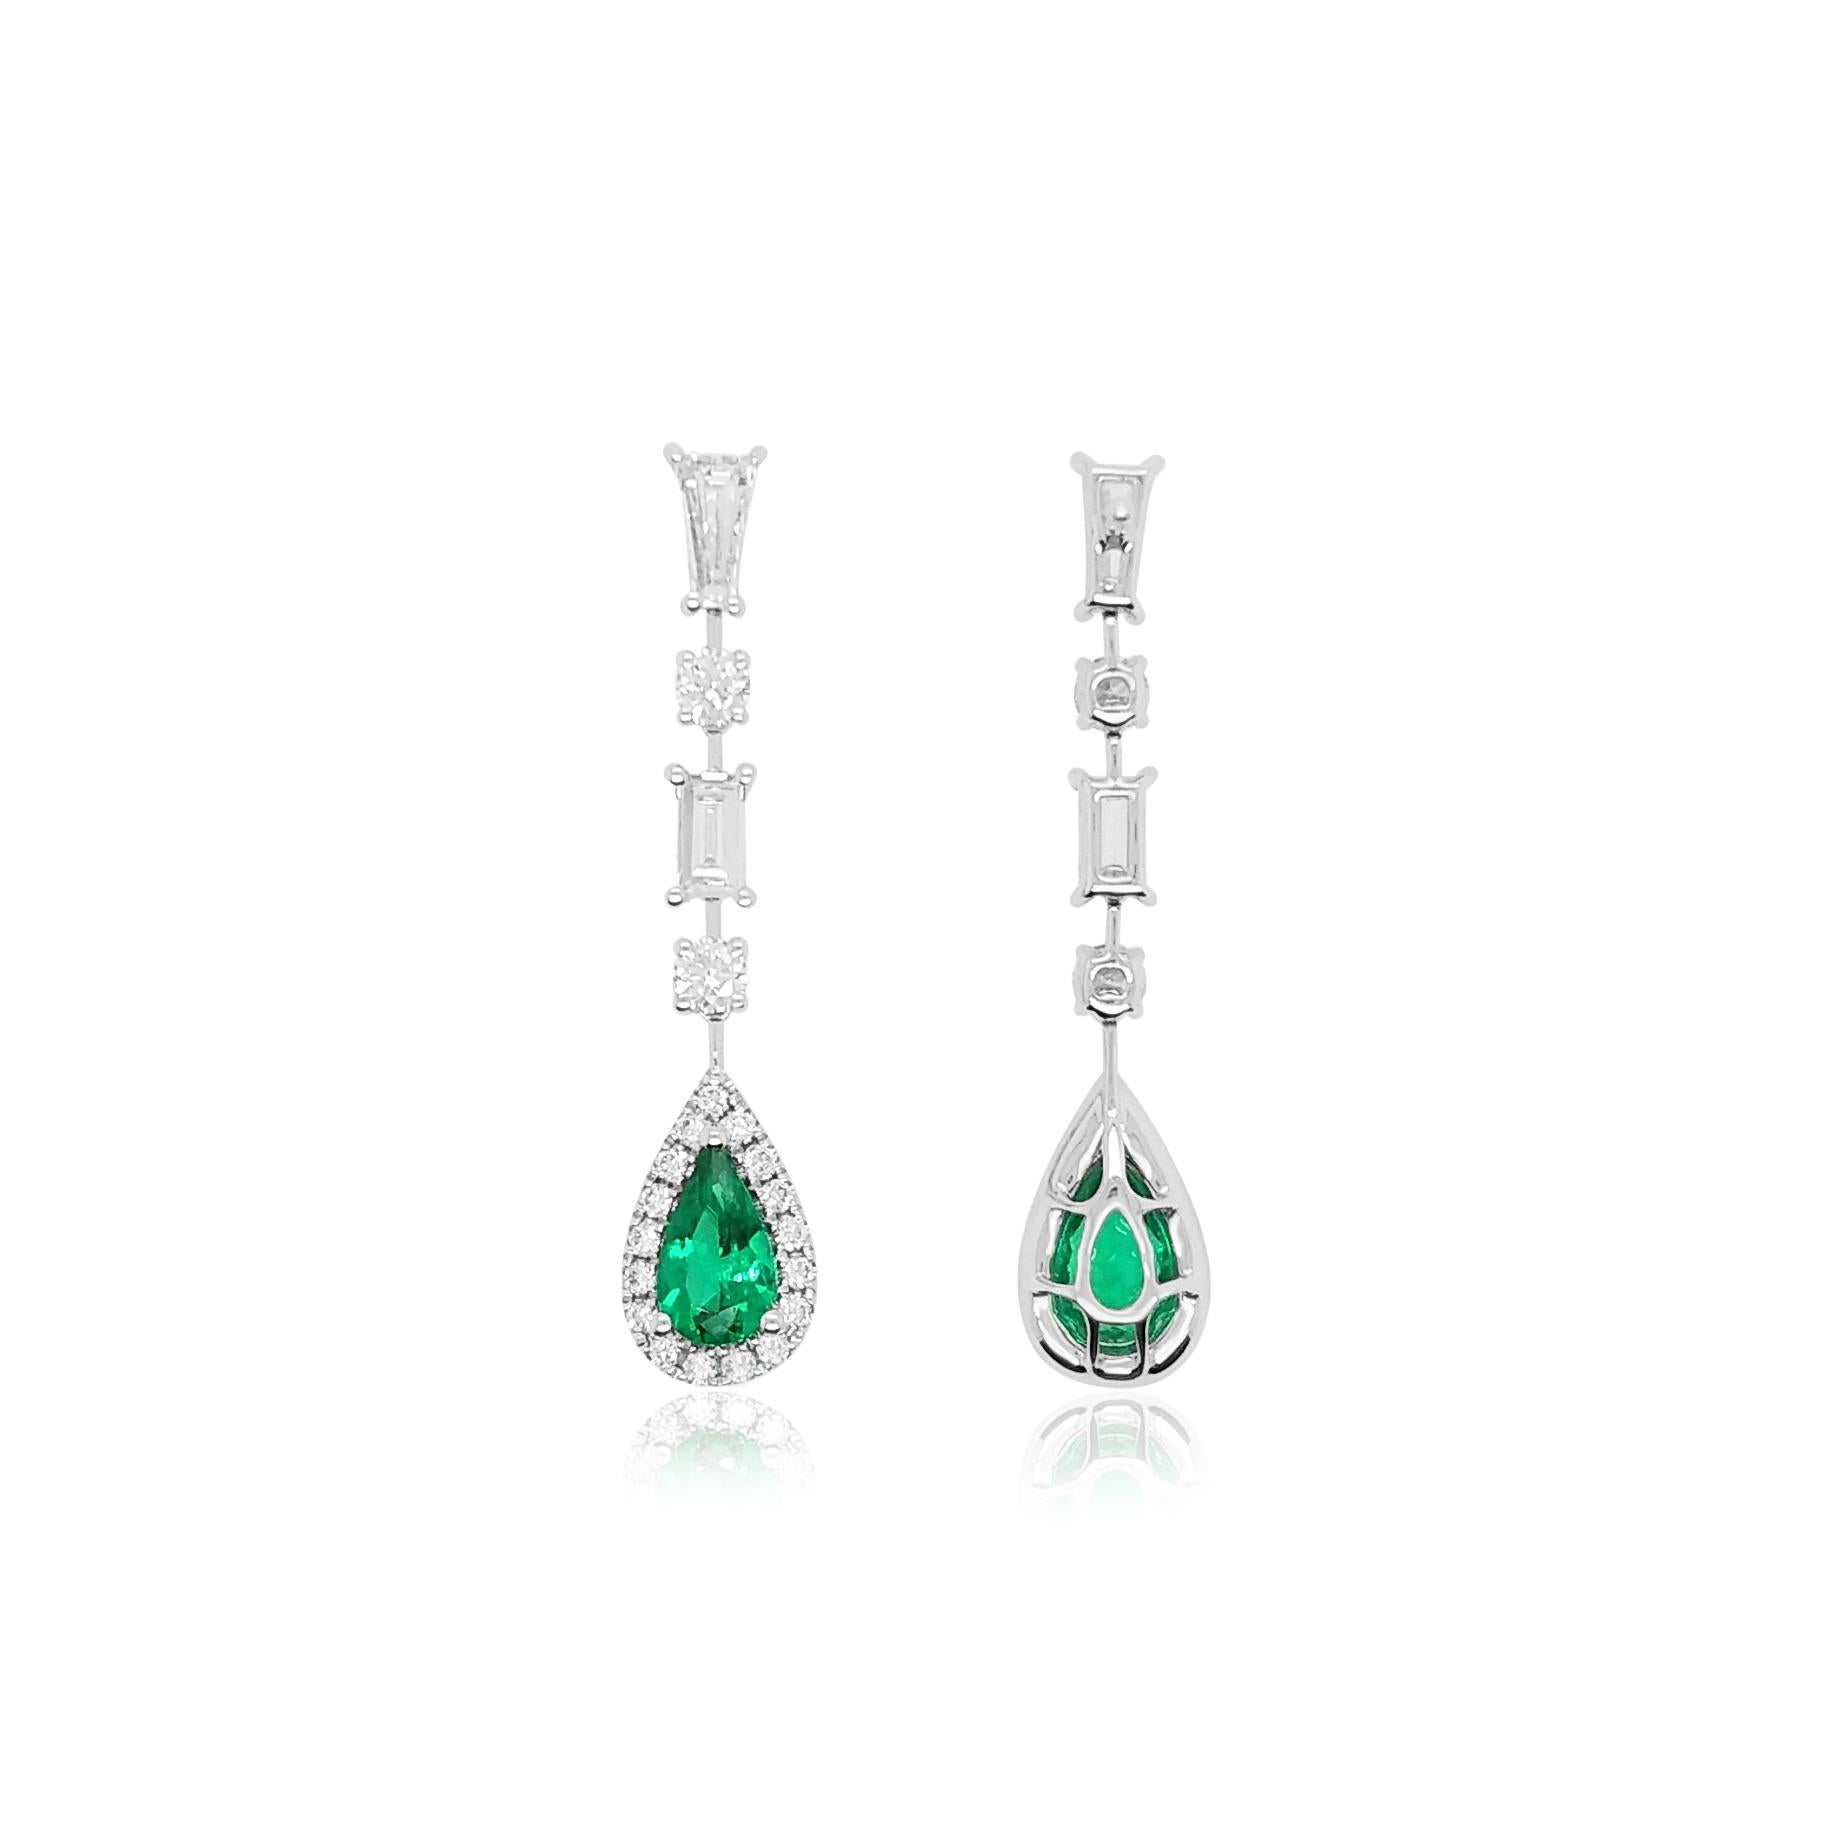 These elegant 18K White Gold earrings feature natural Colombian Emeralds beneath a delicate diamonds stream. Set in 18 Karat white gold to perfectly enrich the colour of the emerald and the sparkle of the diamonds, these intricate earrings will add